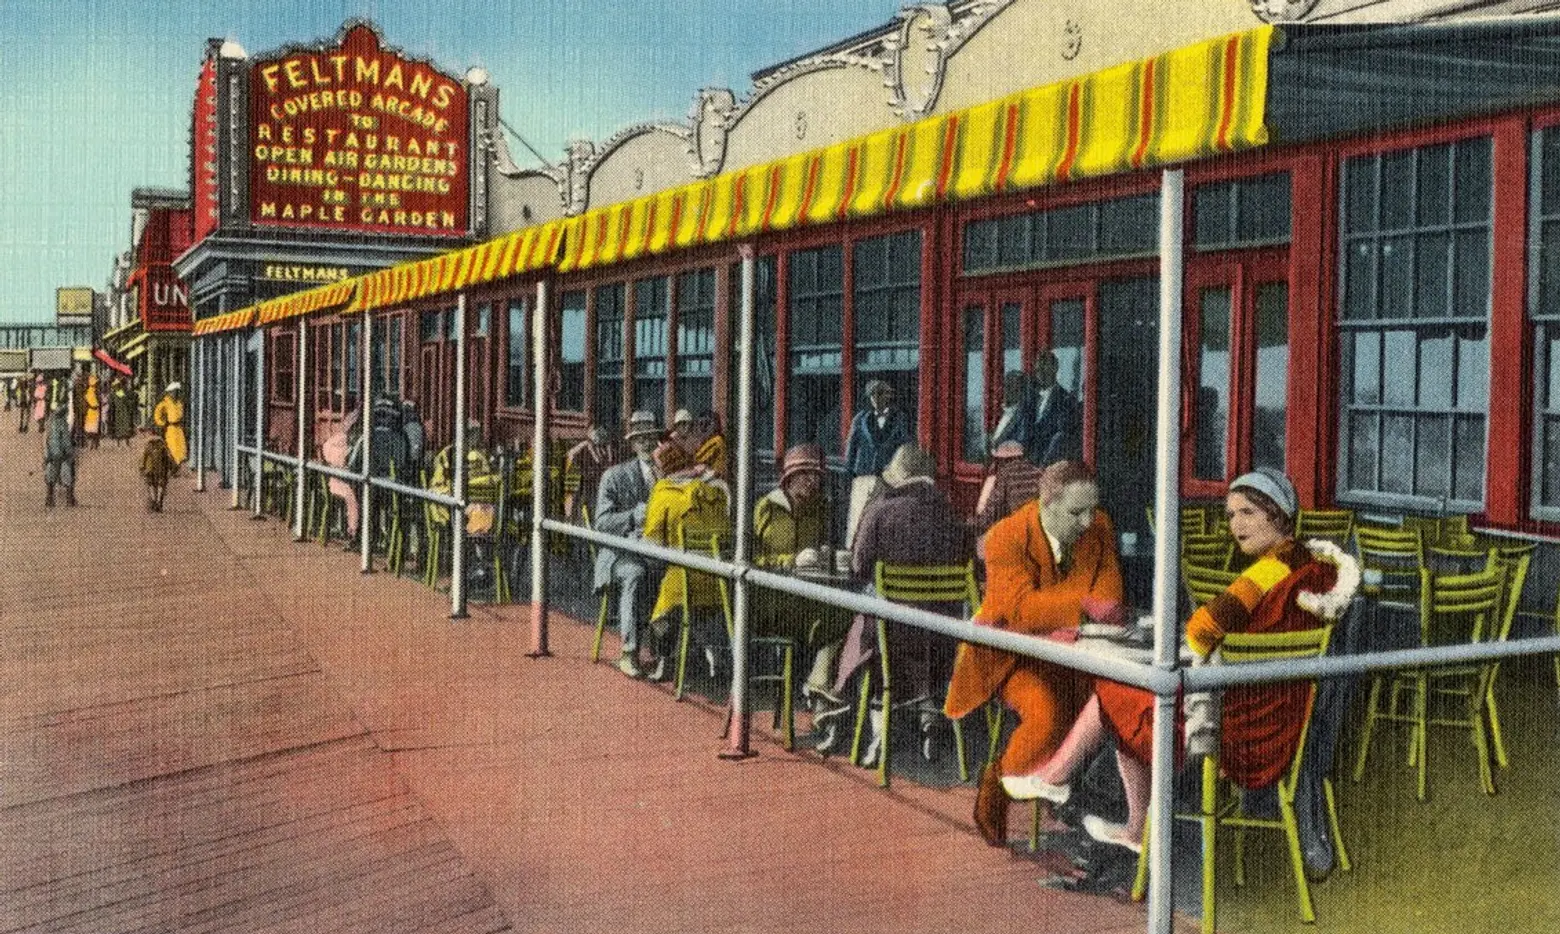 Before Nathan’s there was Feltman’s: The history of the Coney Island hot dog